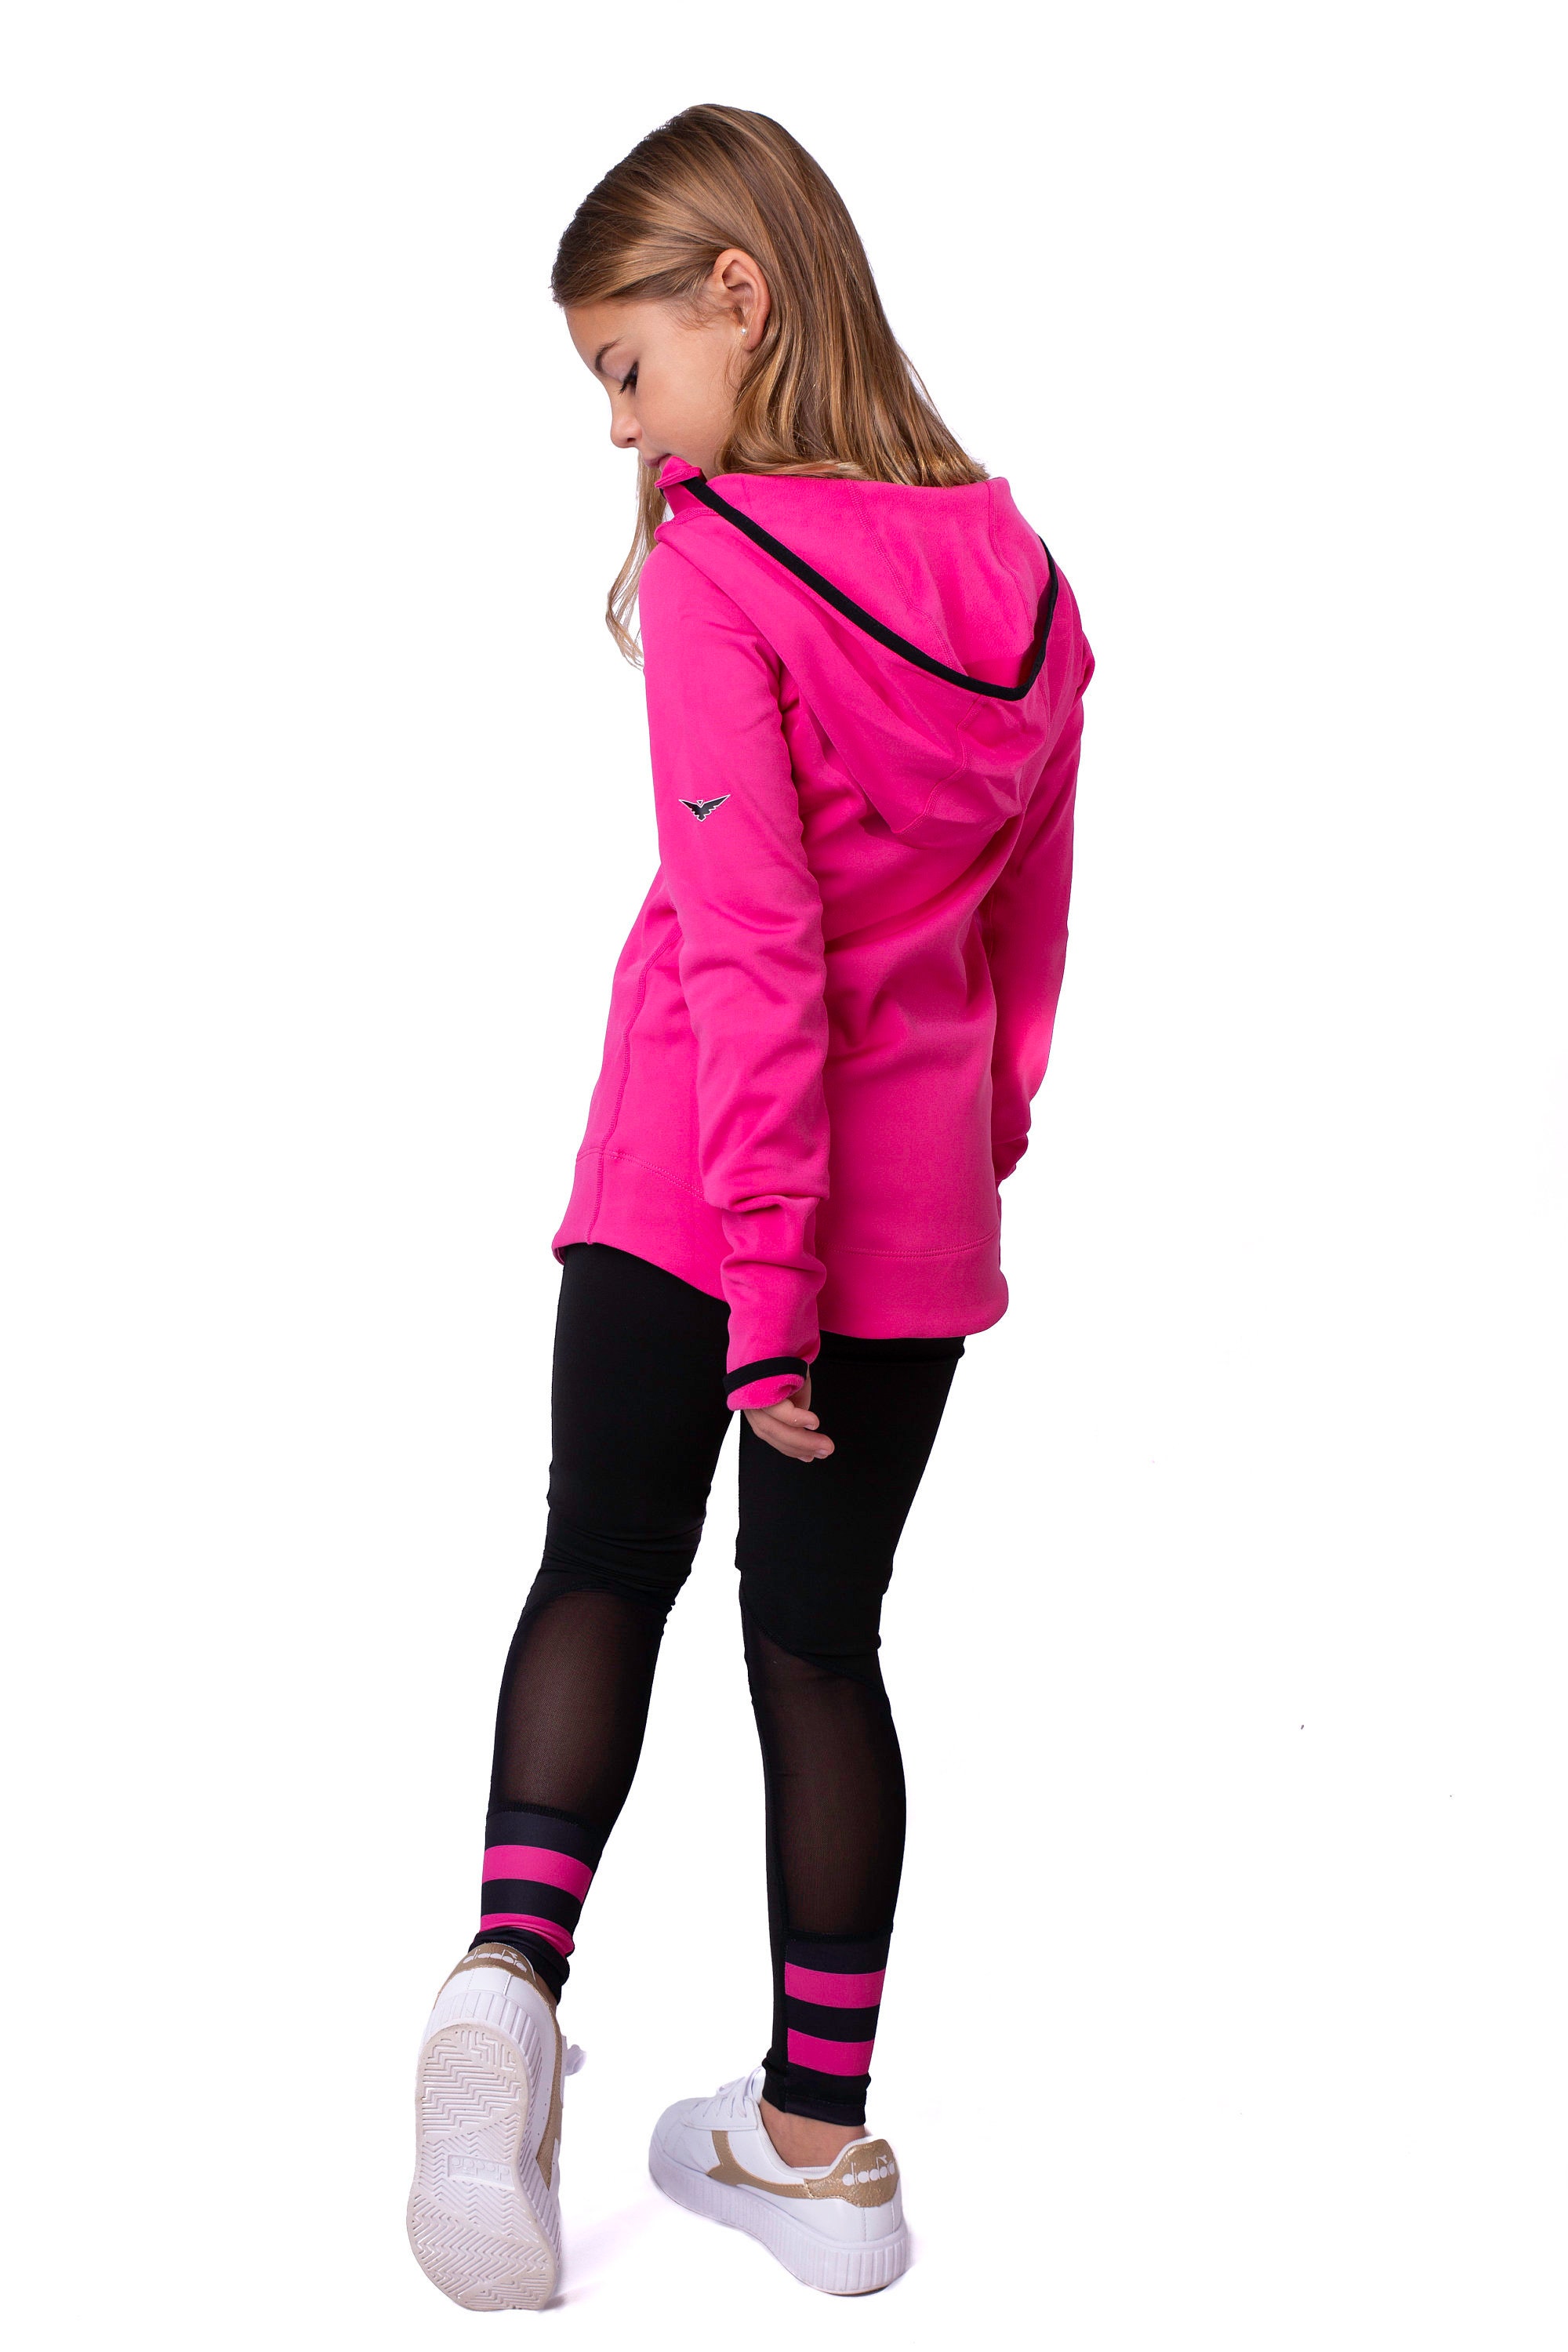 Buy Girls Tennis Leggings With Ball Pockets, Black Leggings With Pockets,  Black Fitness Tights, Girls Tights, Running Tights, Online in India 